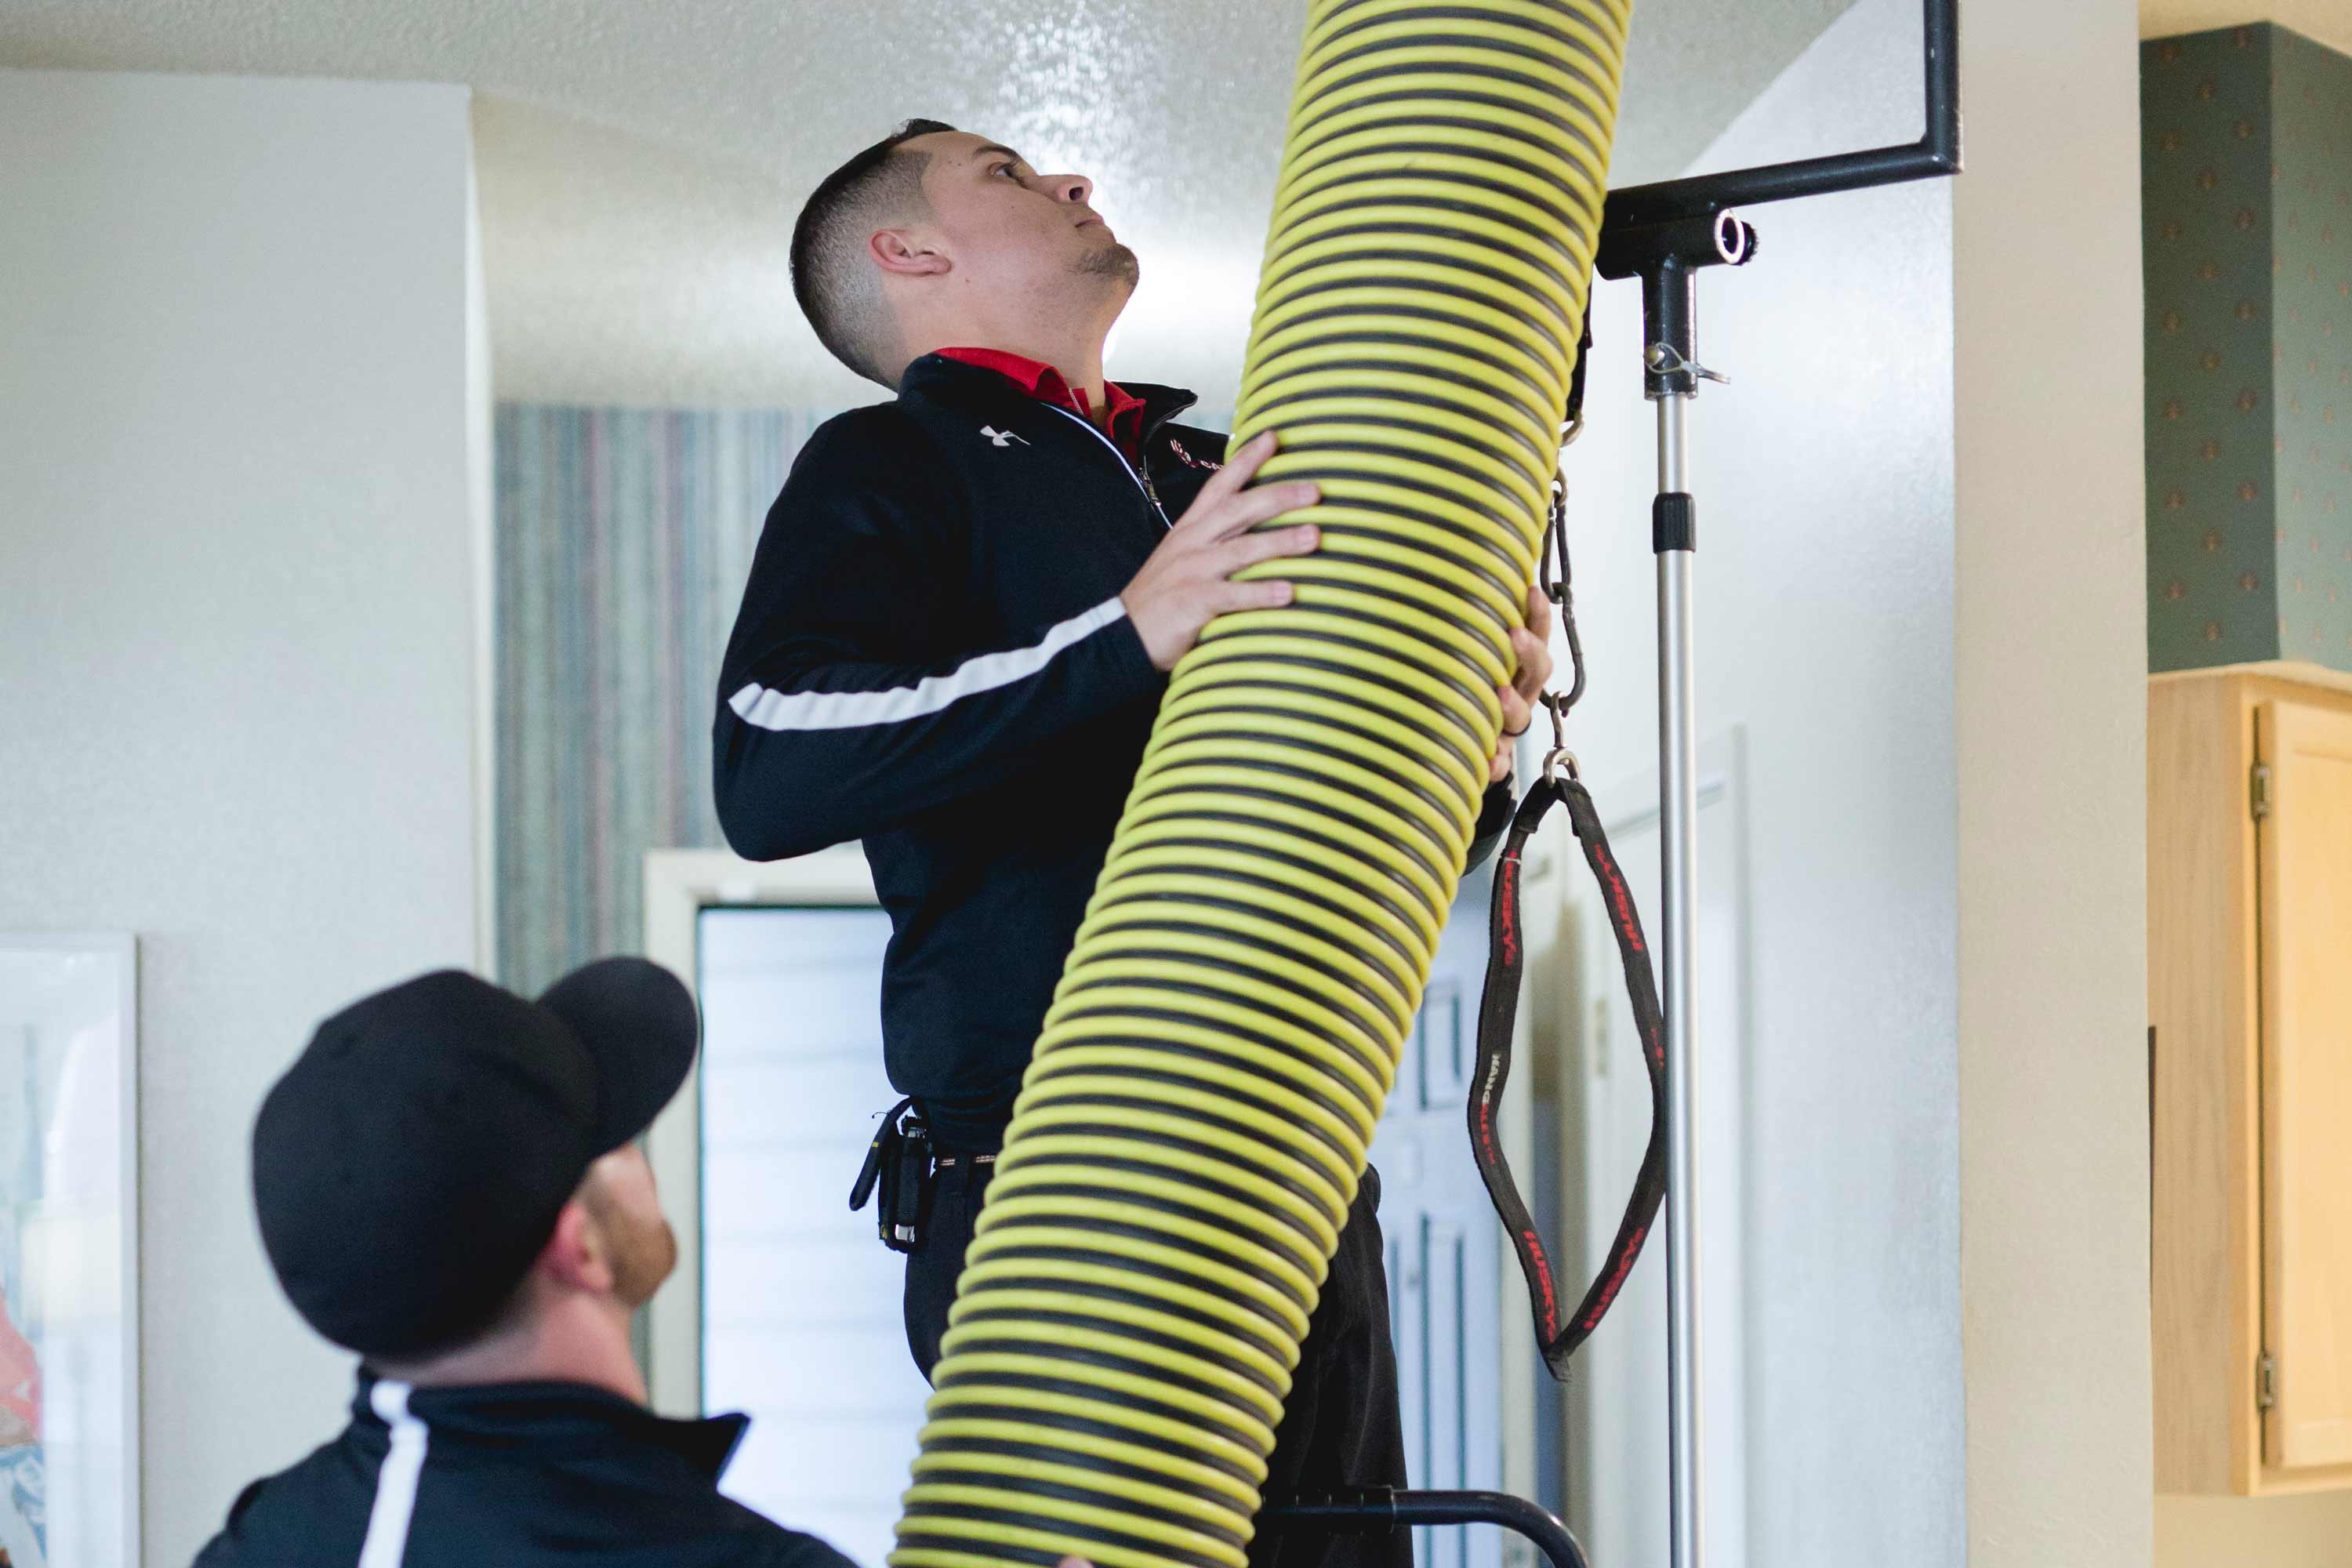 30 OFF Dryer Vent Cleaning in Tampa, FL Air Duct Cleaning Tampa, FL